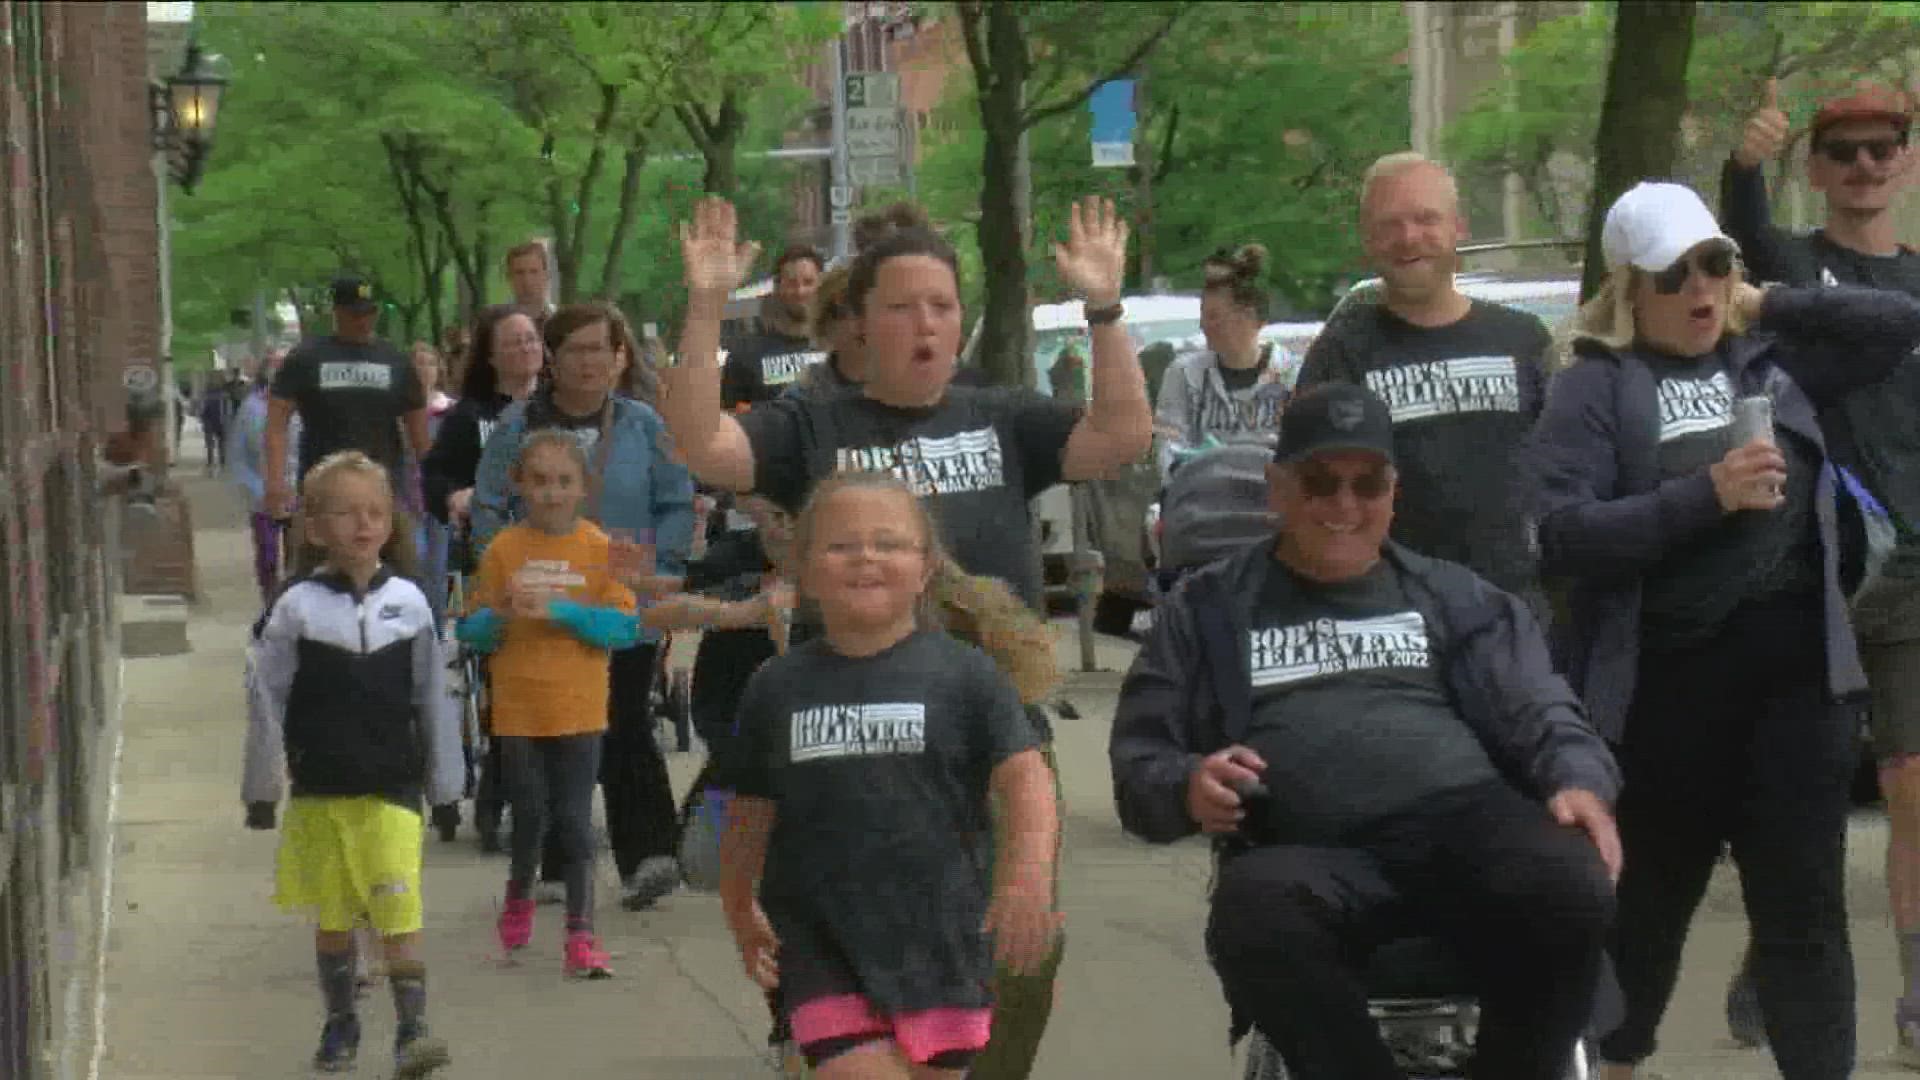 Downtown Toledo and the Huntington Center was packed with people eager to 'Walk for MS' and raise awareness for people living with the disease.